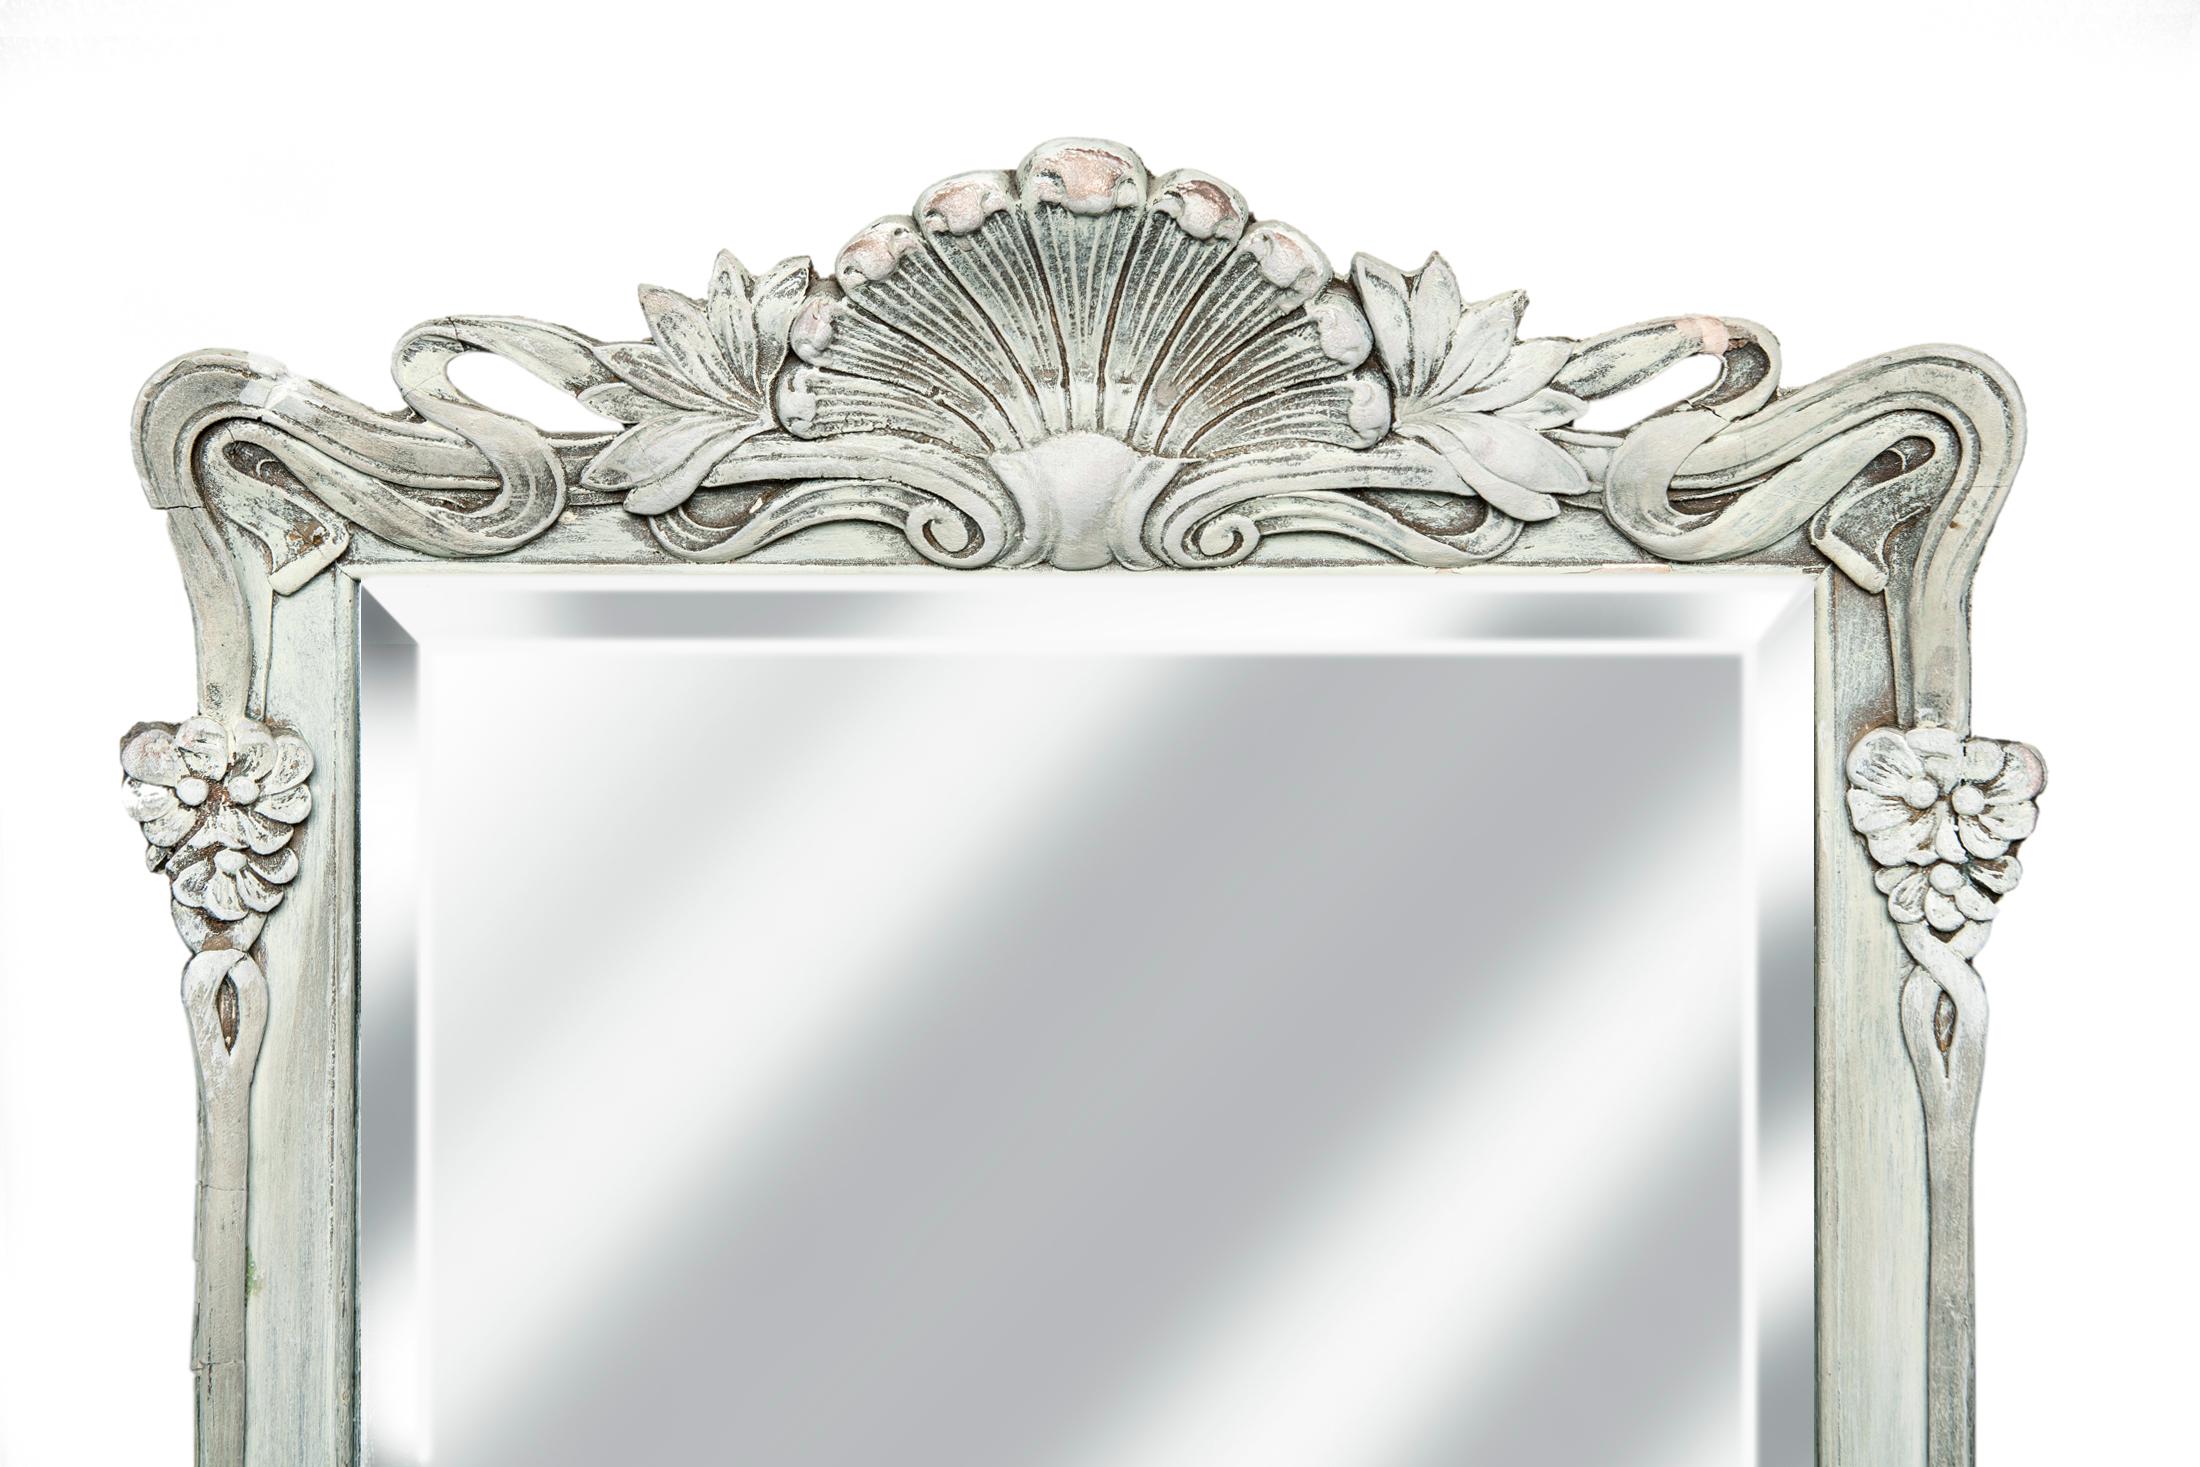 Art Nouveau artisan crafted frame/ fine beveled mirror. Elongated rectangle
older beveled mirror. Wired to hang with the crest on the top or bottom.